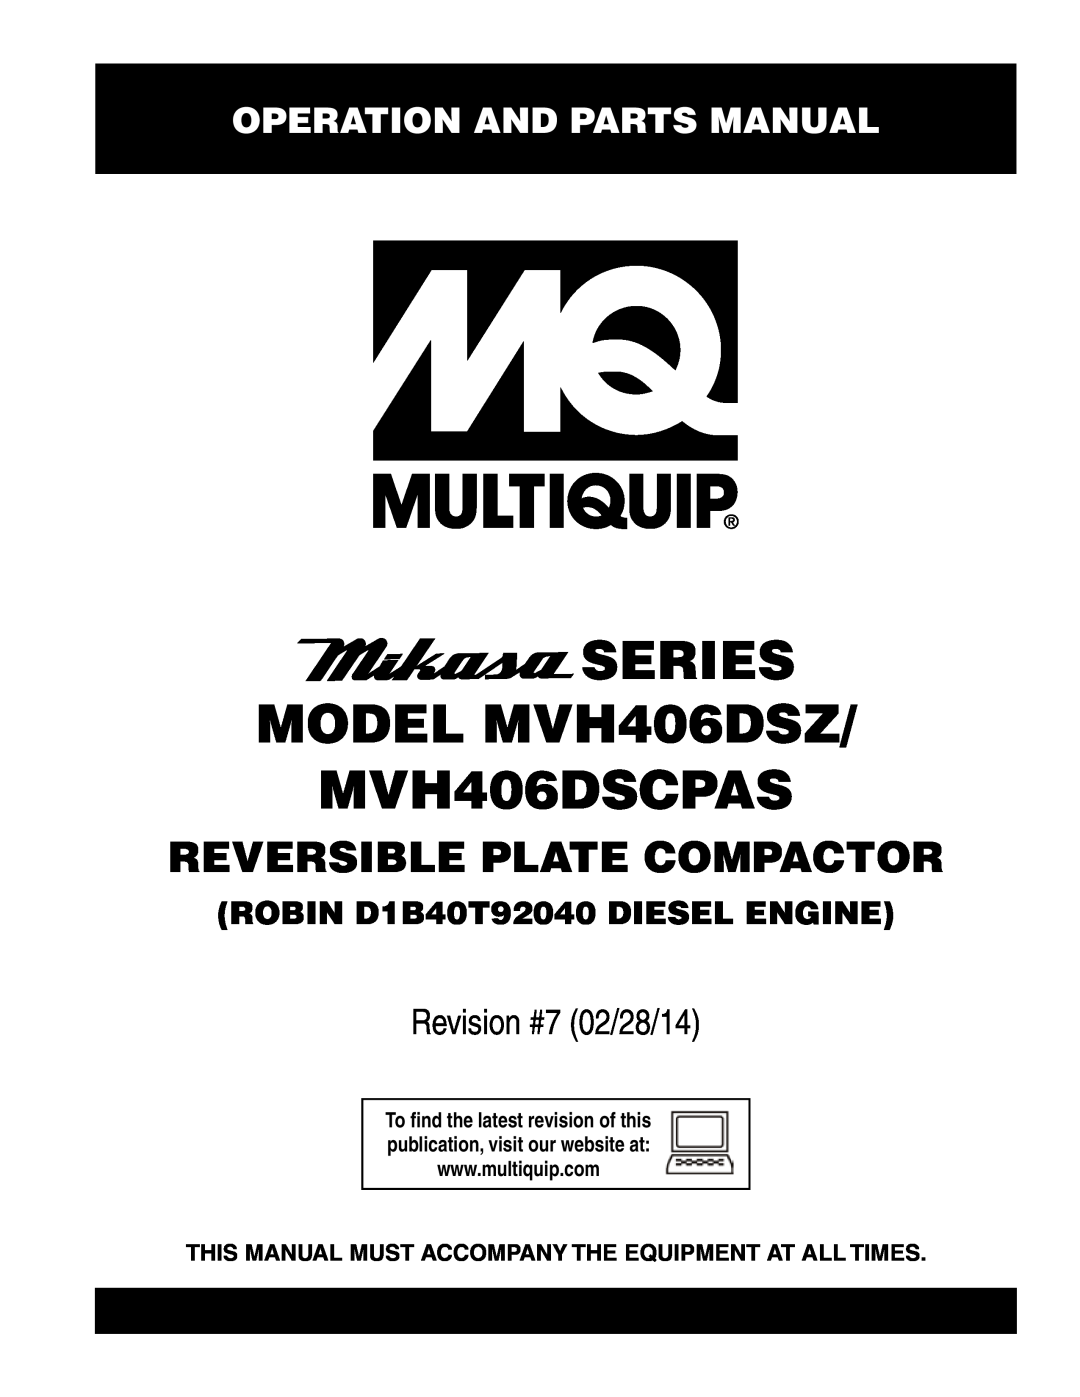 Multiquip MVH406DSCPAS, MVH406DSZ manual Operation and Parts Manual, This Manual Must Accompany The Equipment At All Times 